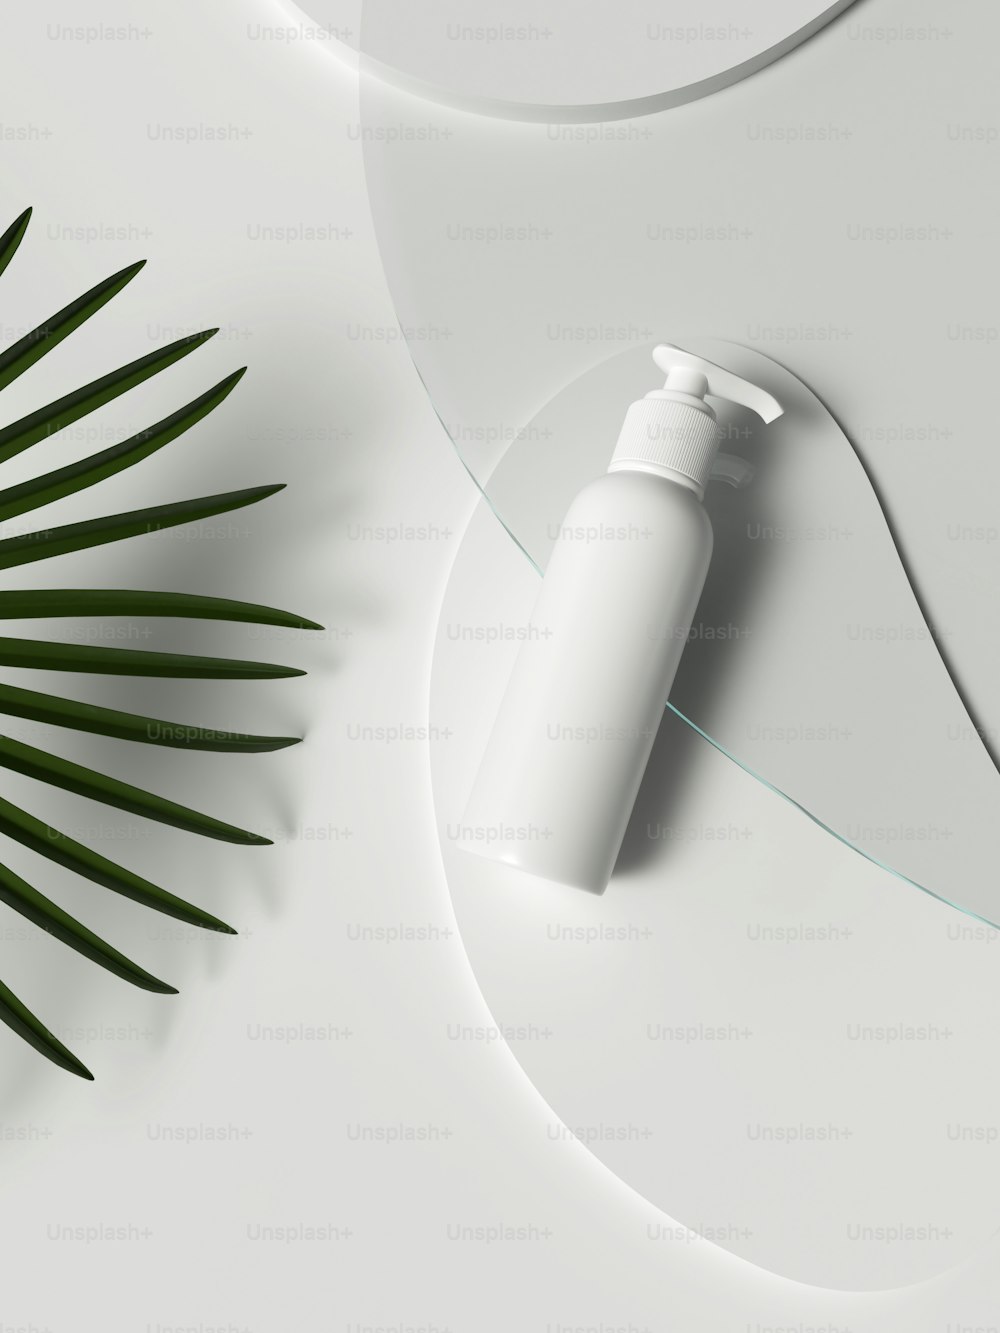 a bottle of lotion next to a palm leaf